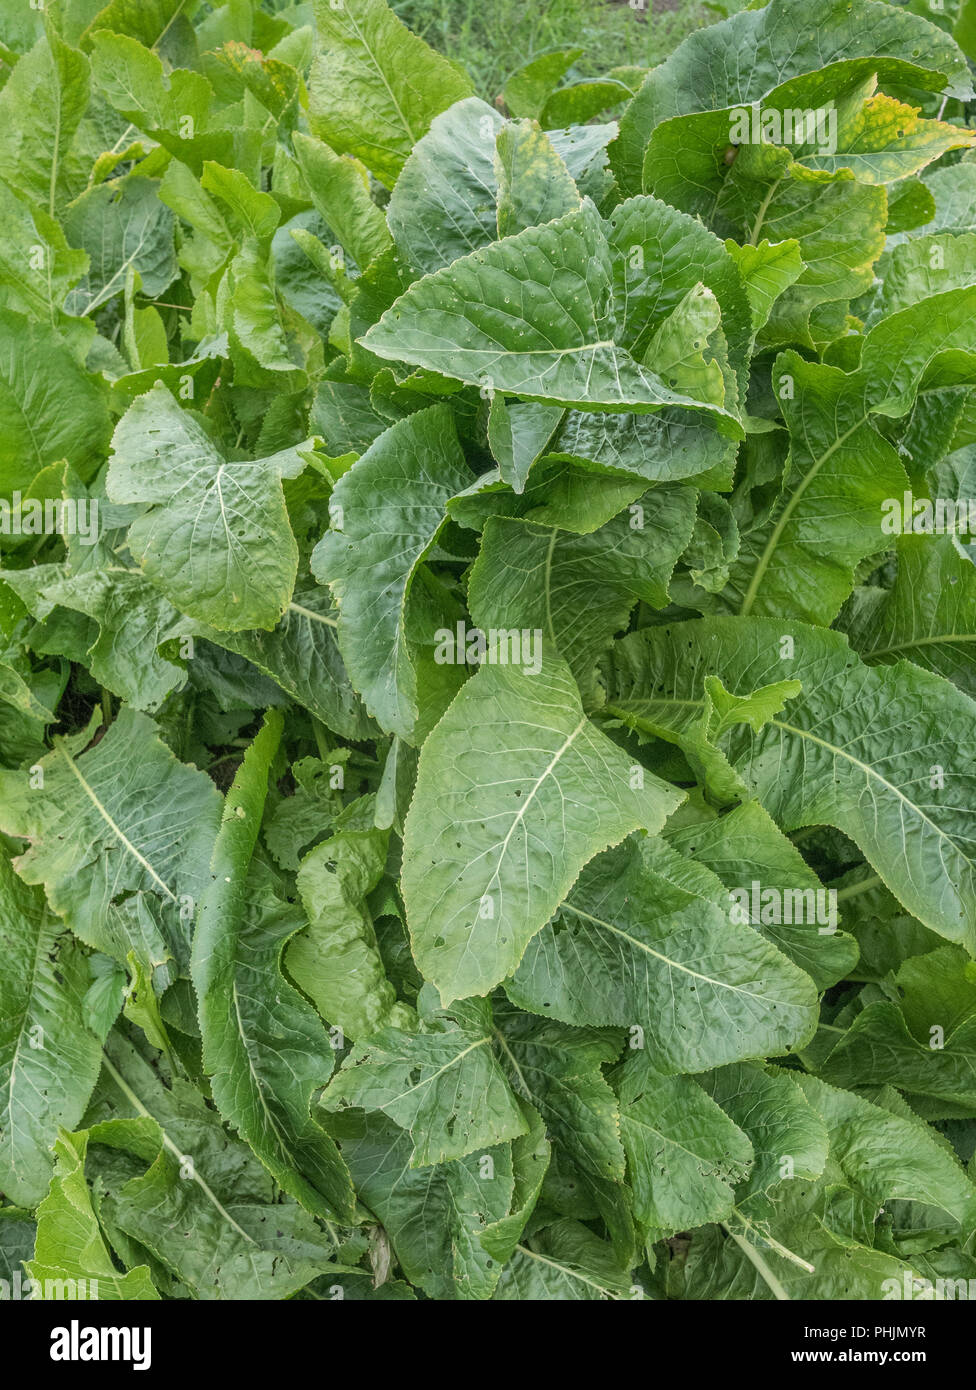 Large green leaves of a cluster of Horseradish / Armoracia rusticana plants growing. A medicinal plant, Horseradish was once used in herbal remedies. Stock Photo